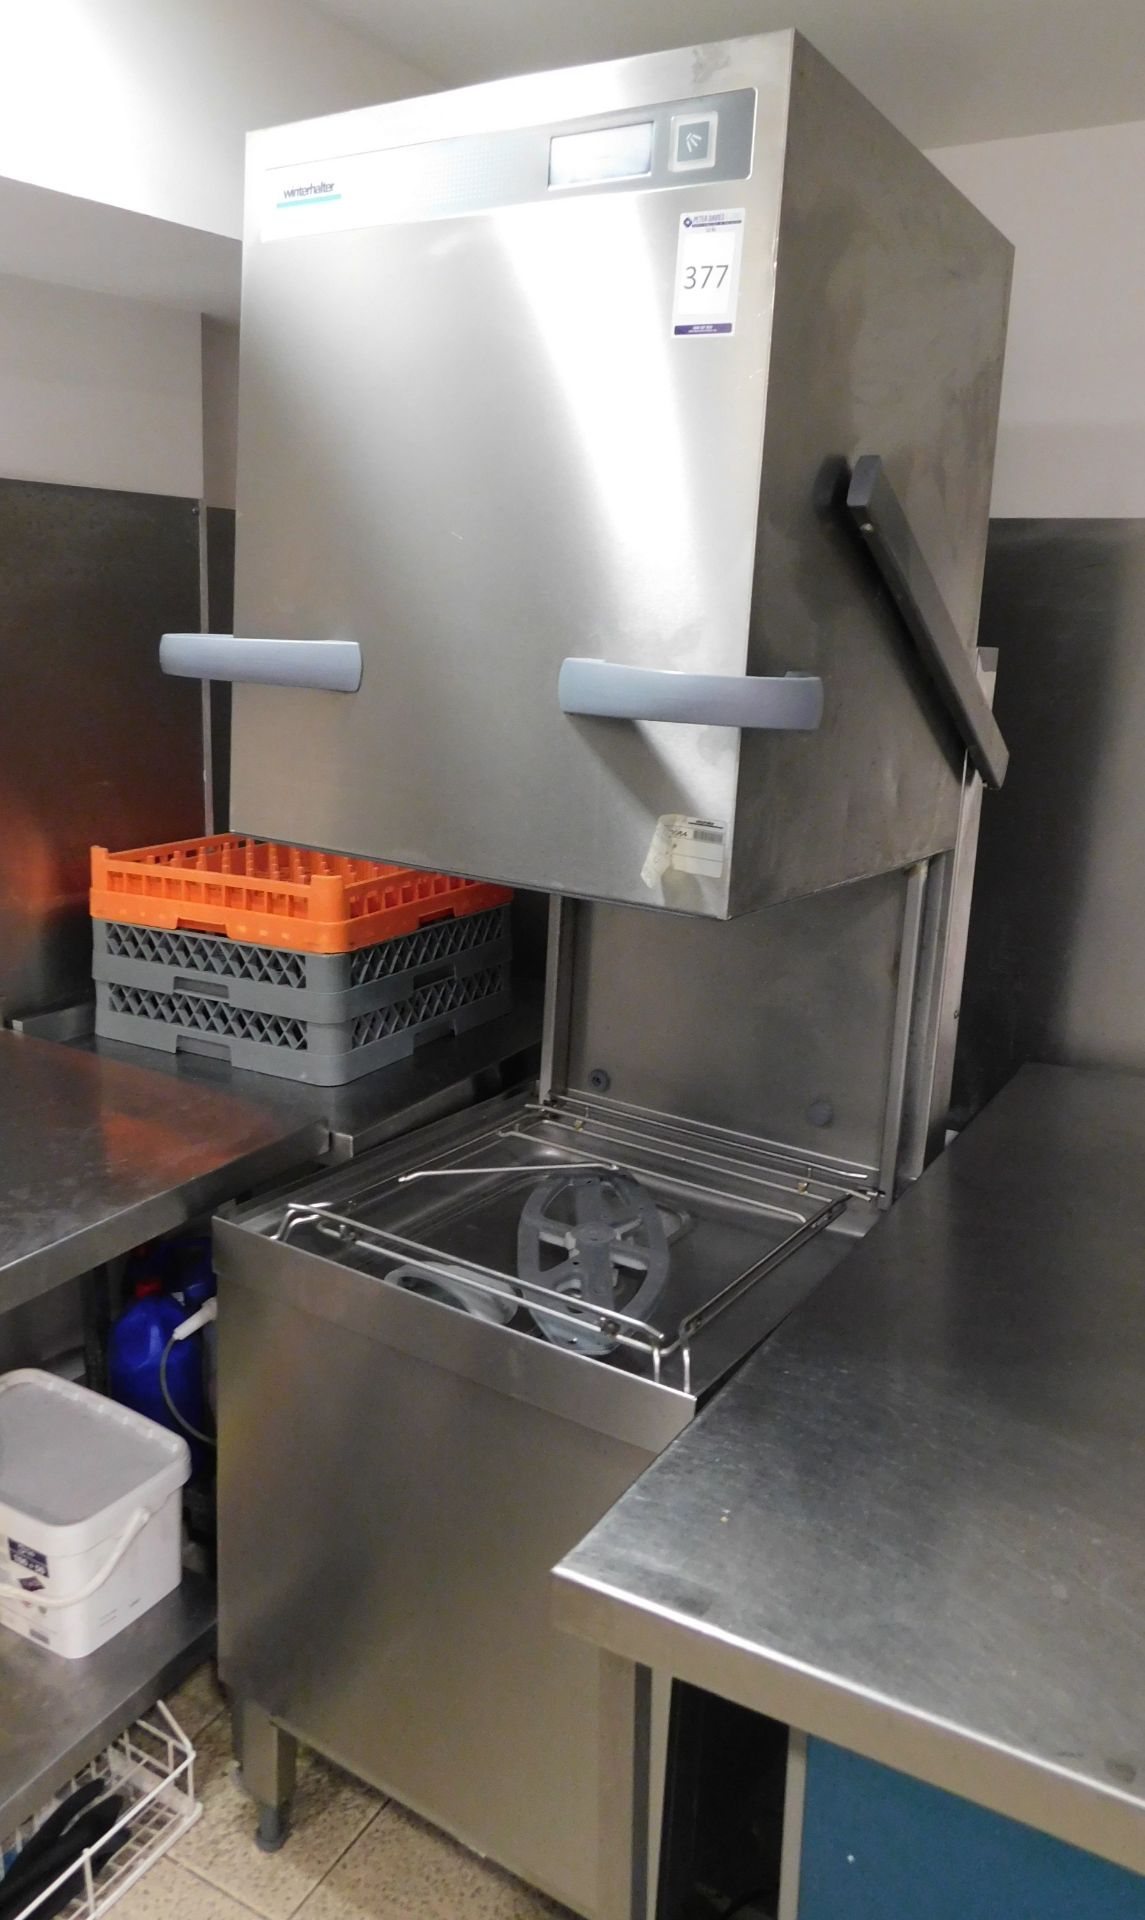 Winterhalter PT-M Hood Stainless Steel Cased Commercial Dishwasher (Located at 155 Farringdon - Image 2 of 2